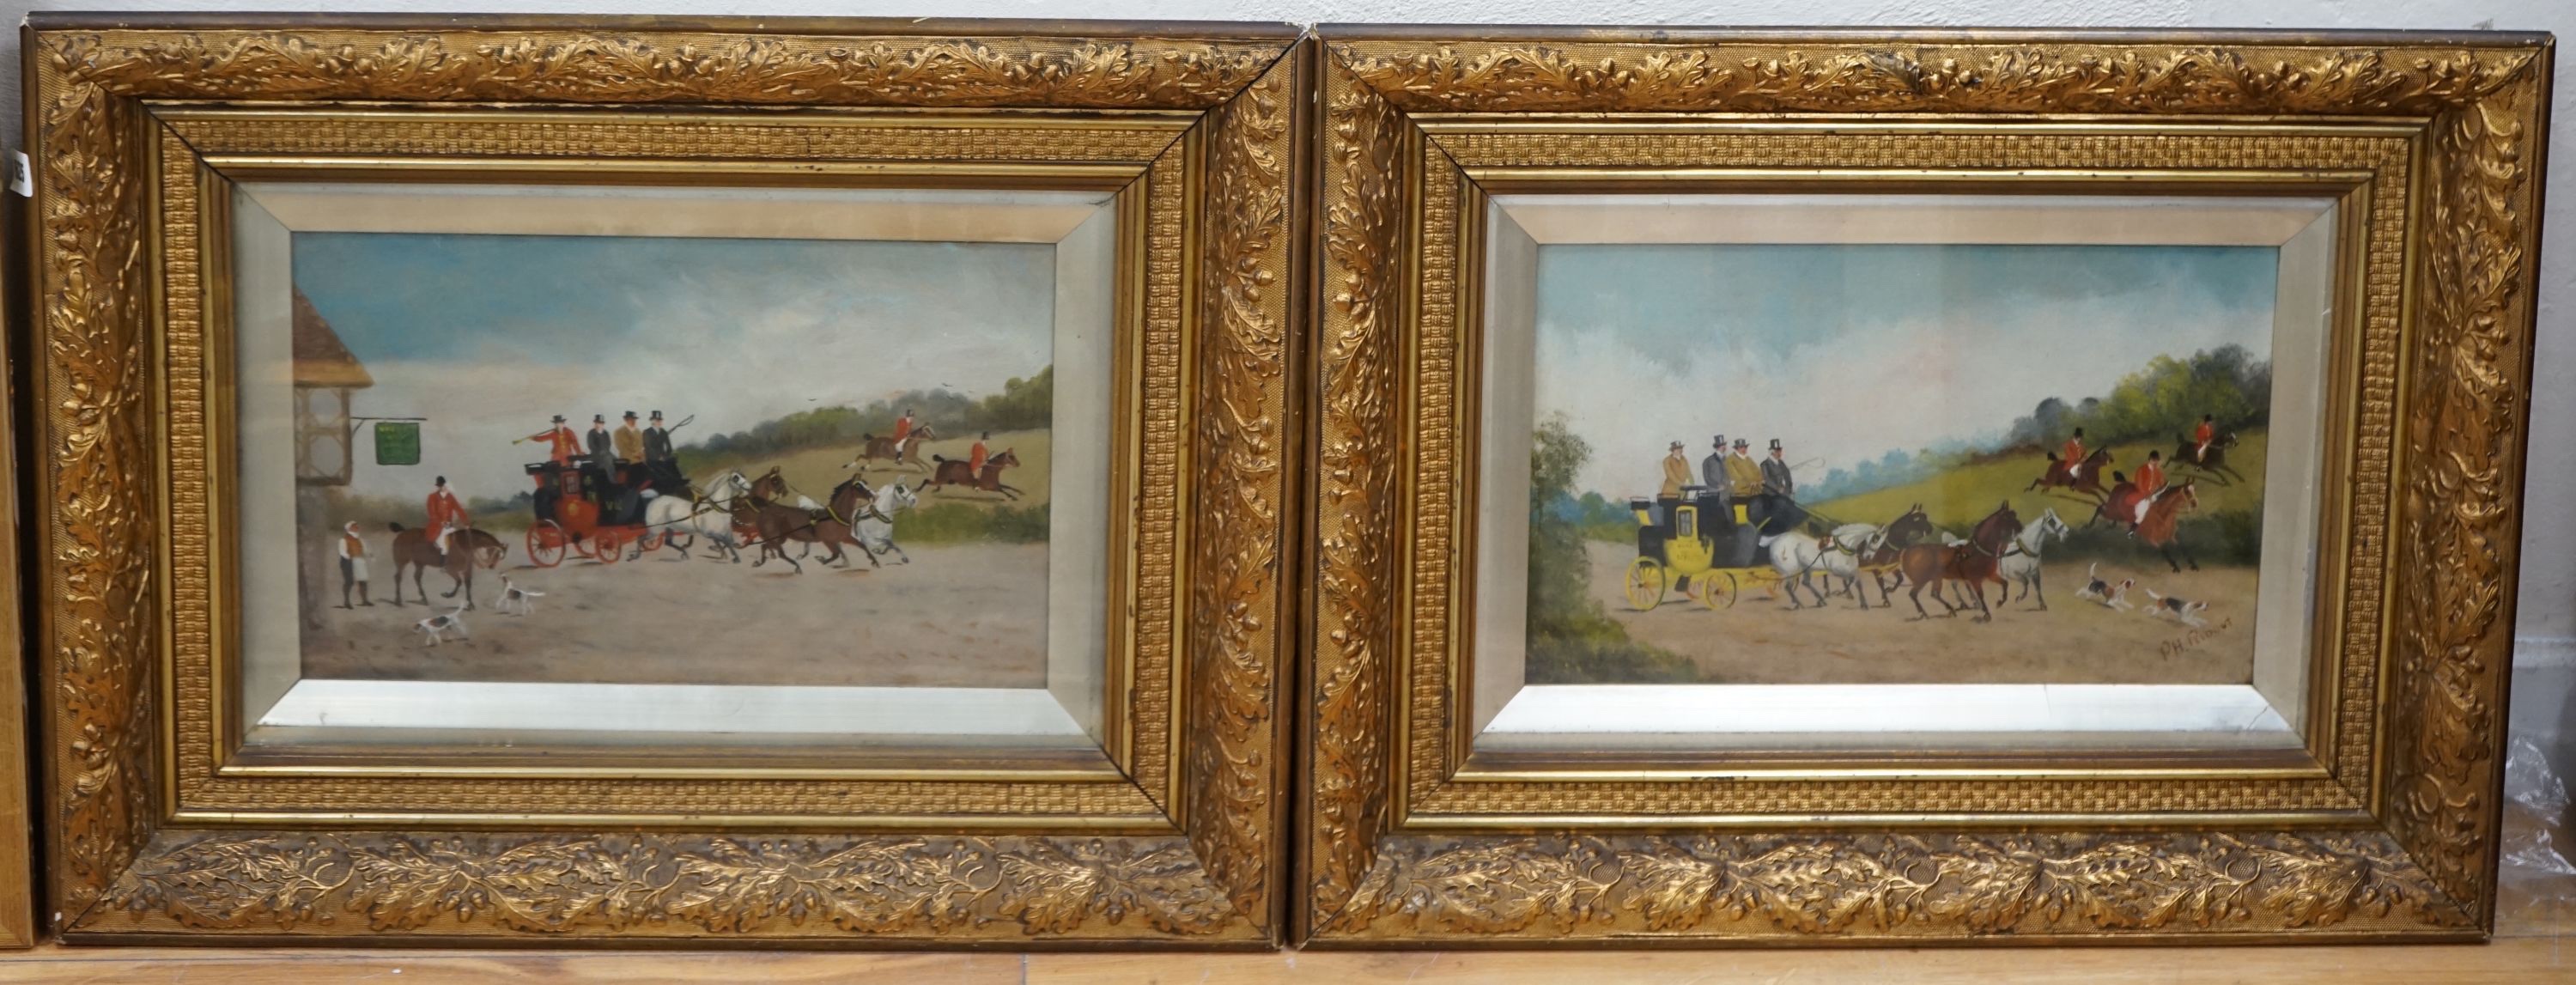 P.H. Ridout, pair of oils on board, Coaching scenes, one signed, 24 x 39cm